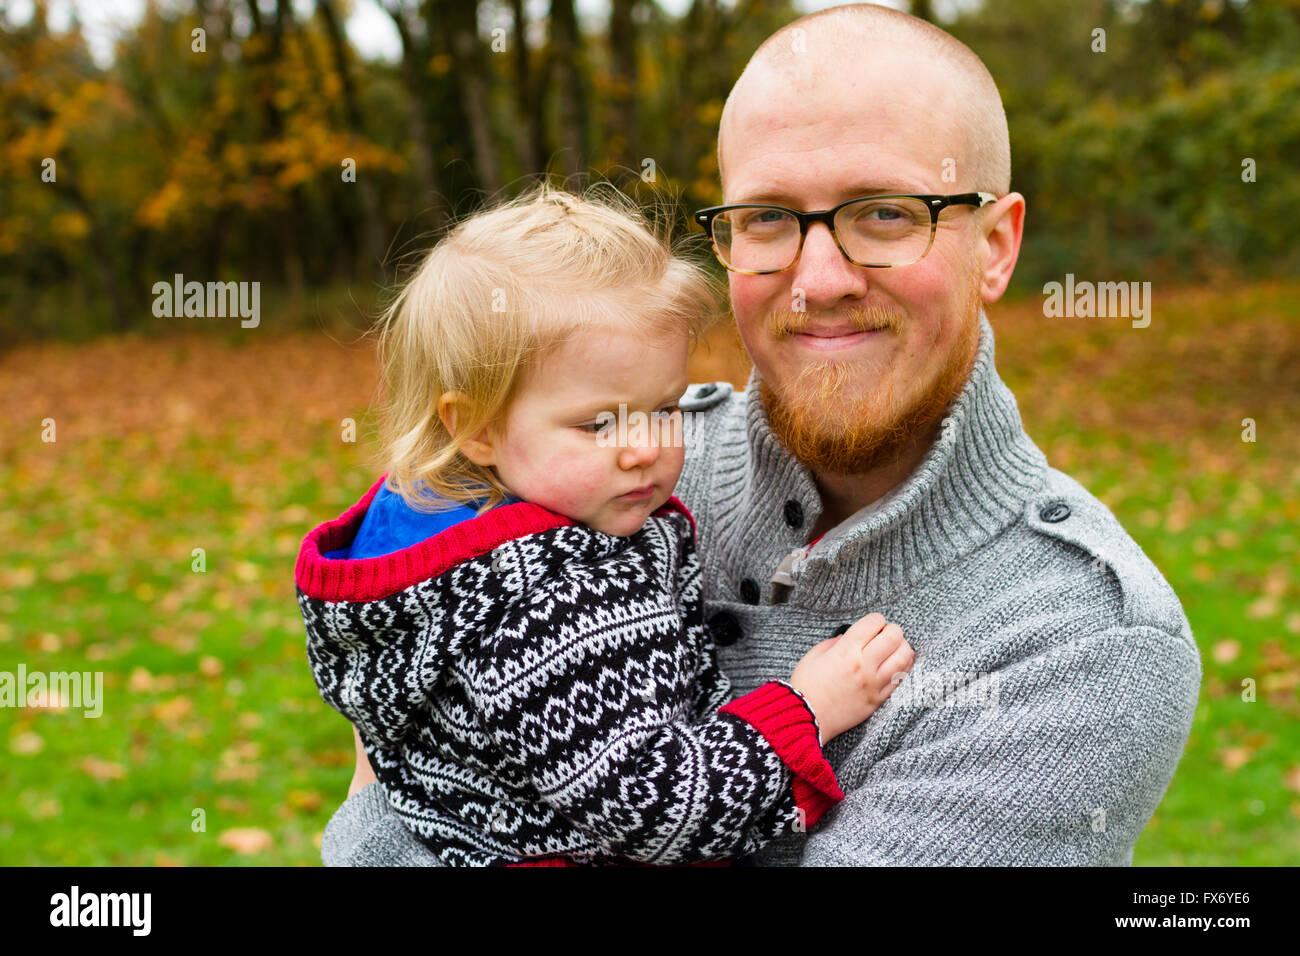 Lifestyle portrait of a father and his daugher outdoors in the Fall. Stock Photo